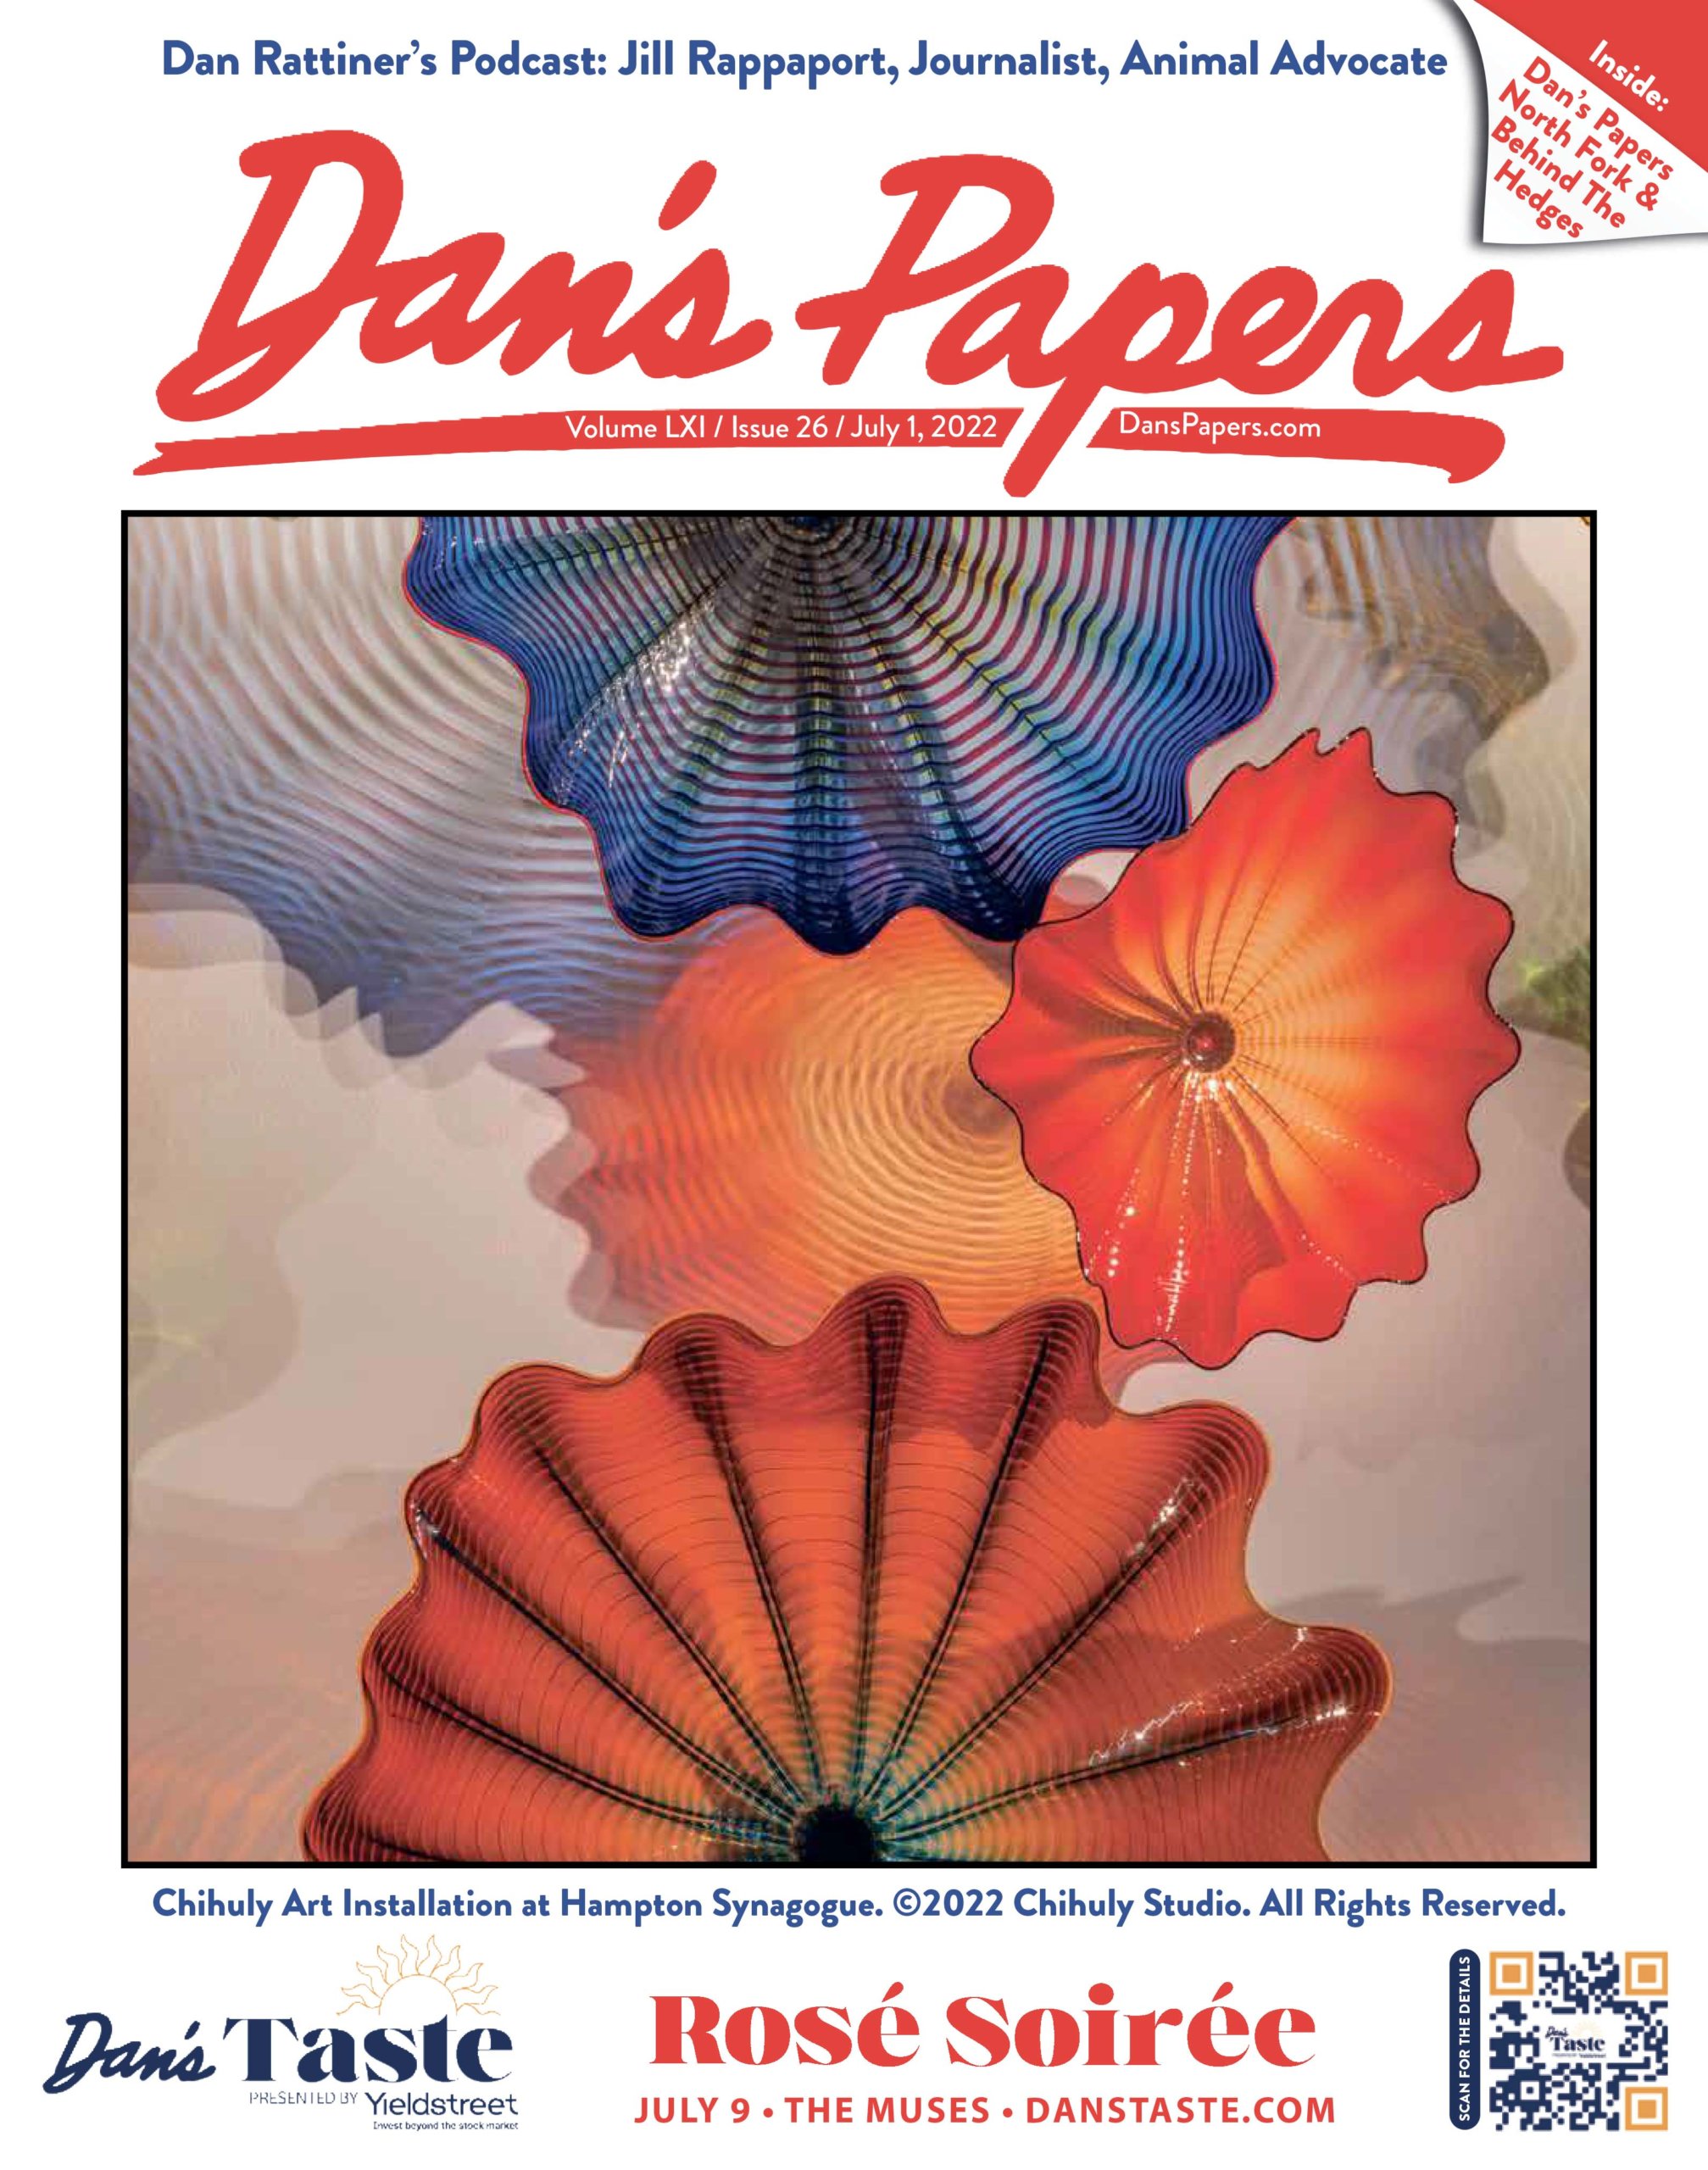 July 1, 2022 Dan's Papers cover art by Dale Chihuly